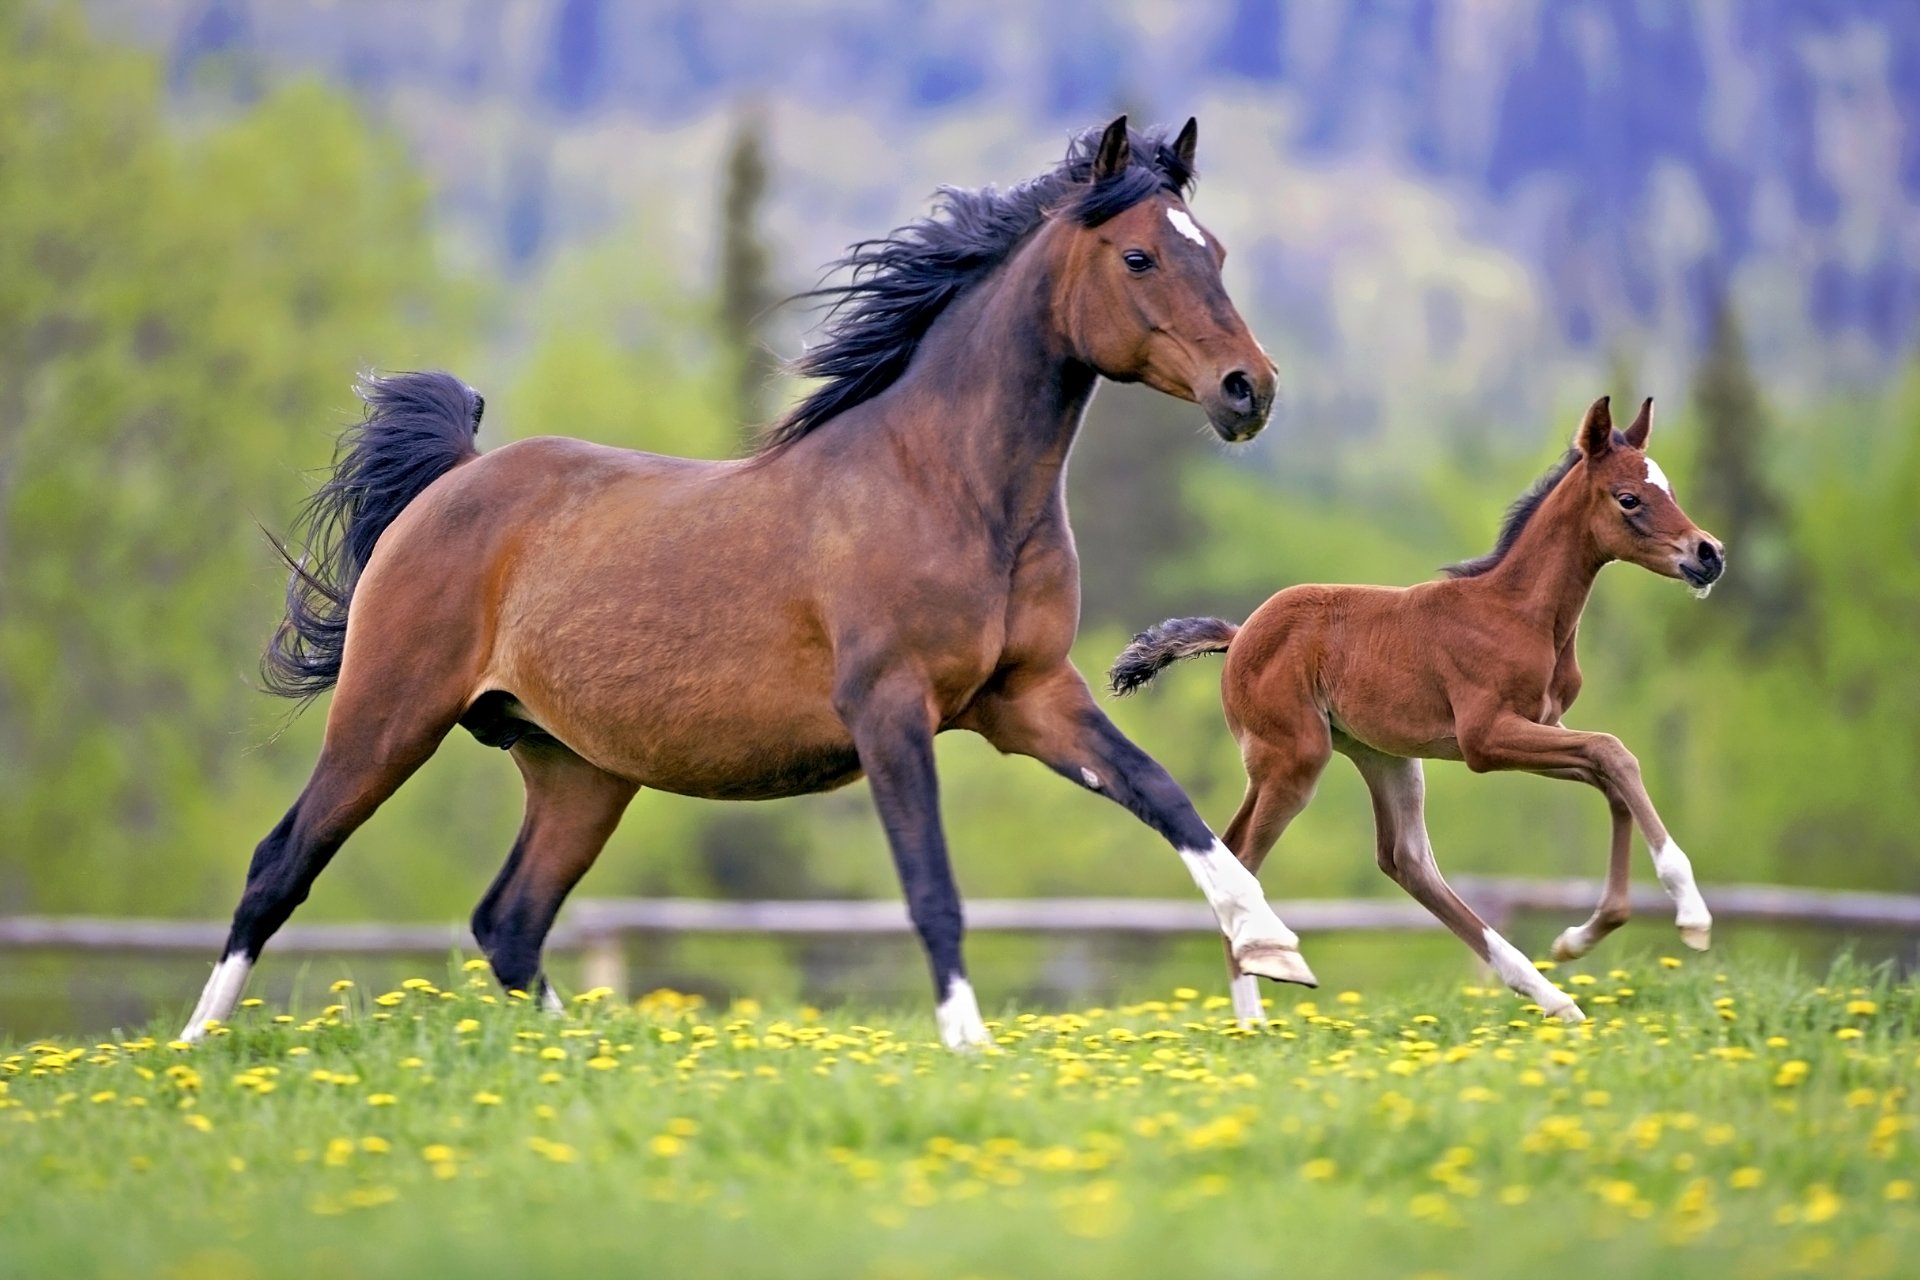 Horse And Foal Galloping - HD Wallpaper 